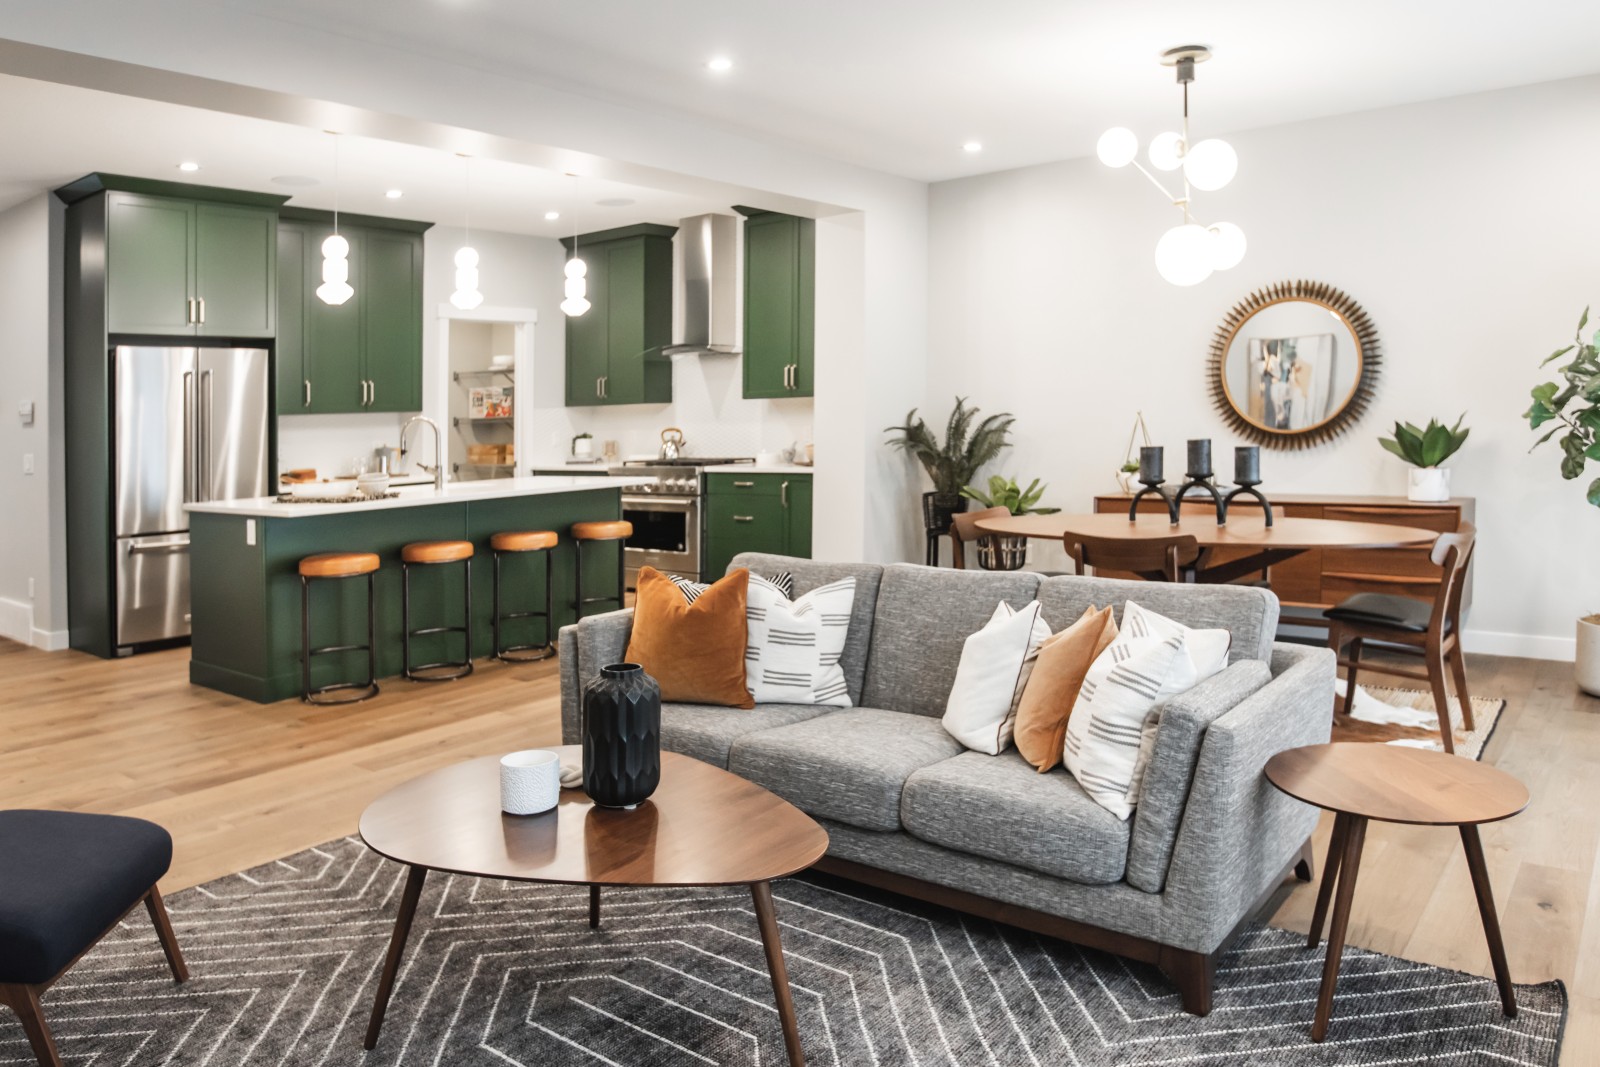 A mid-century inspired kitchen and dining nook in the Bianca showhome featuring bold green cabinets and mid-century dining furniture and accessories